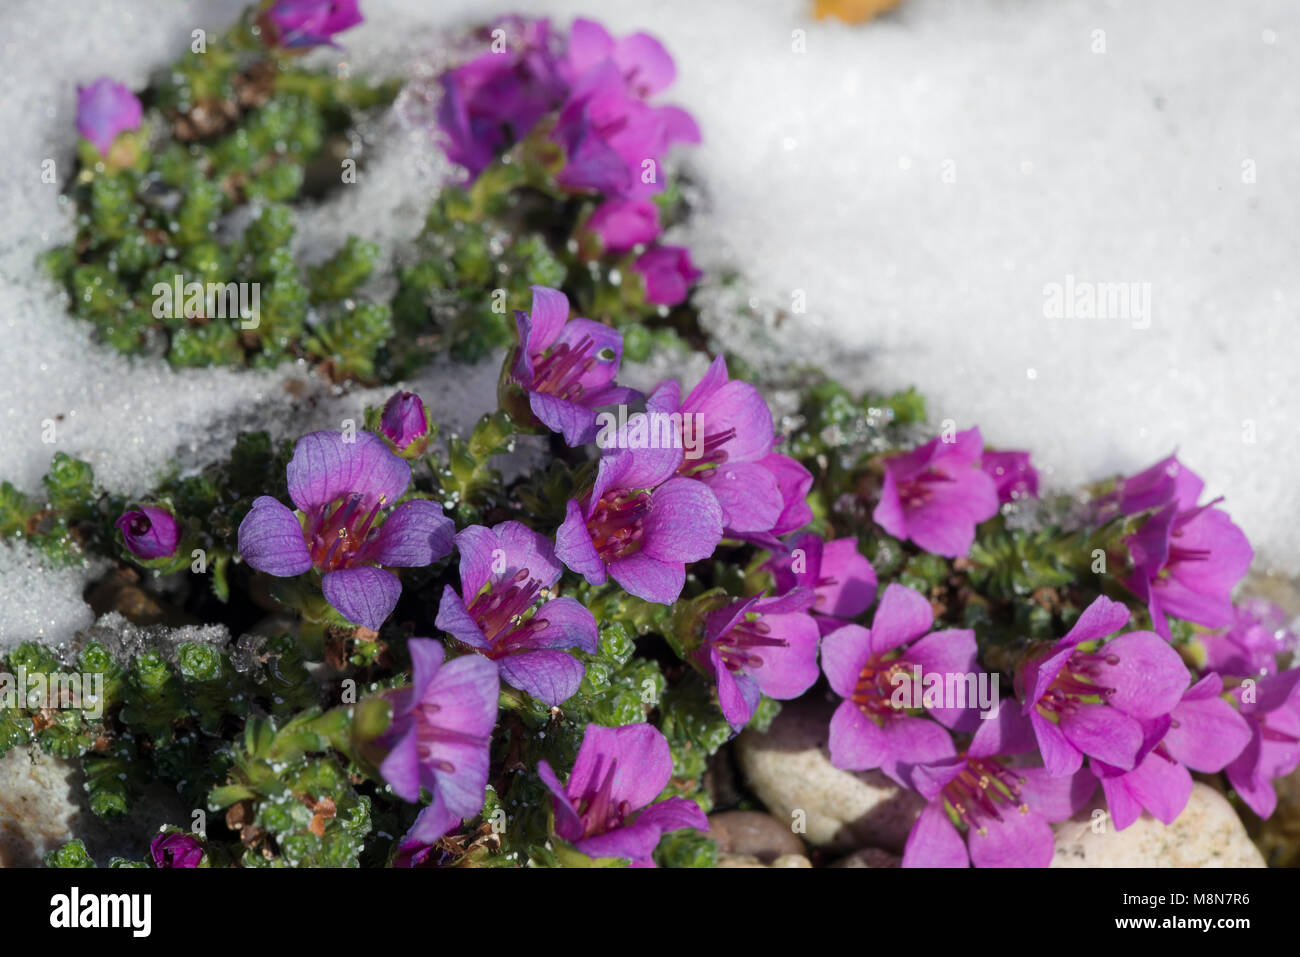 Purple Saxifrage (Saxifraga oppositifolia), flowers in snow and ice crystals, early Spring Stock Photo